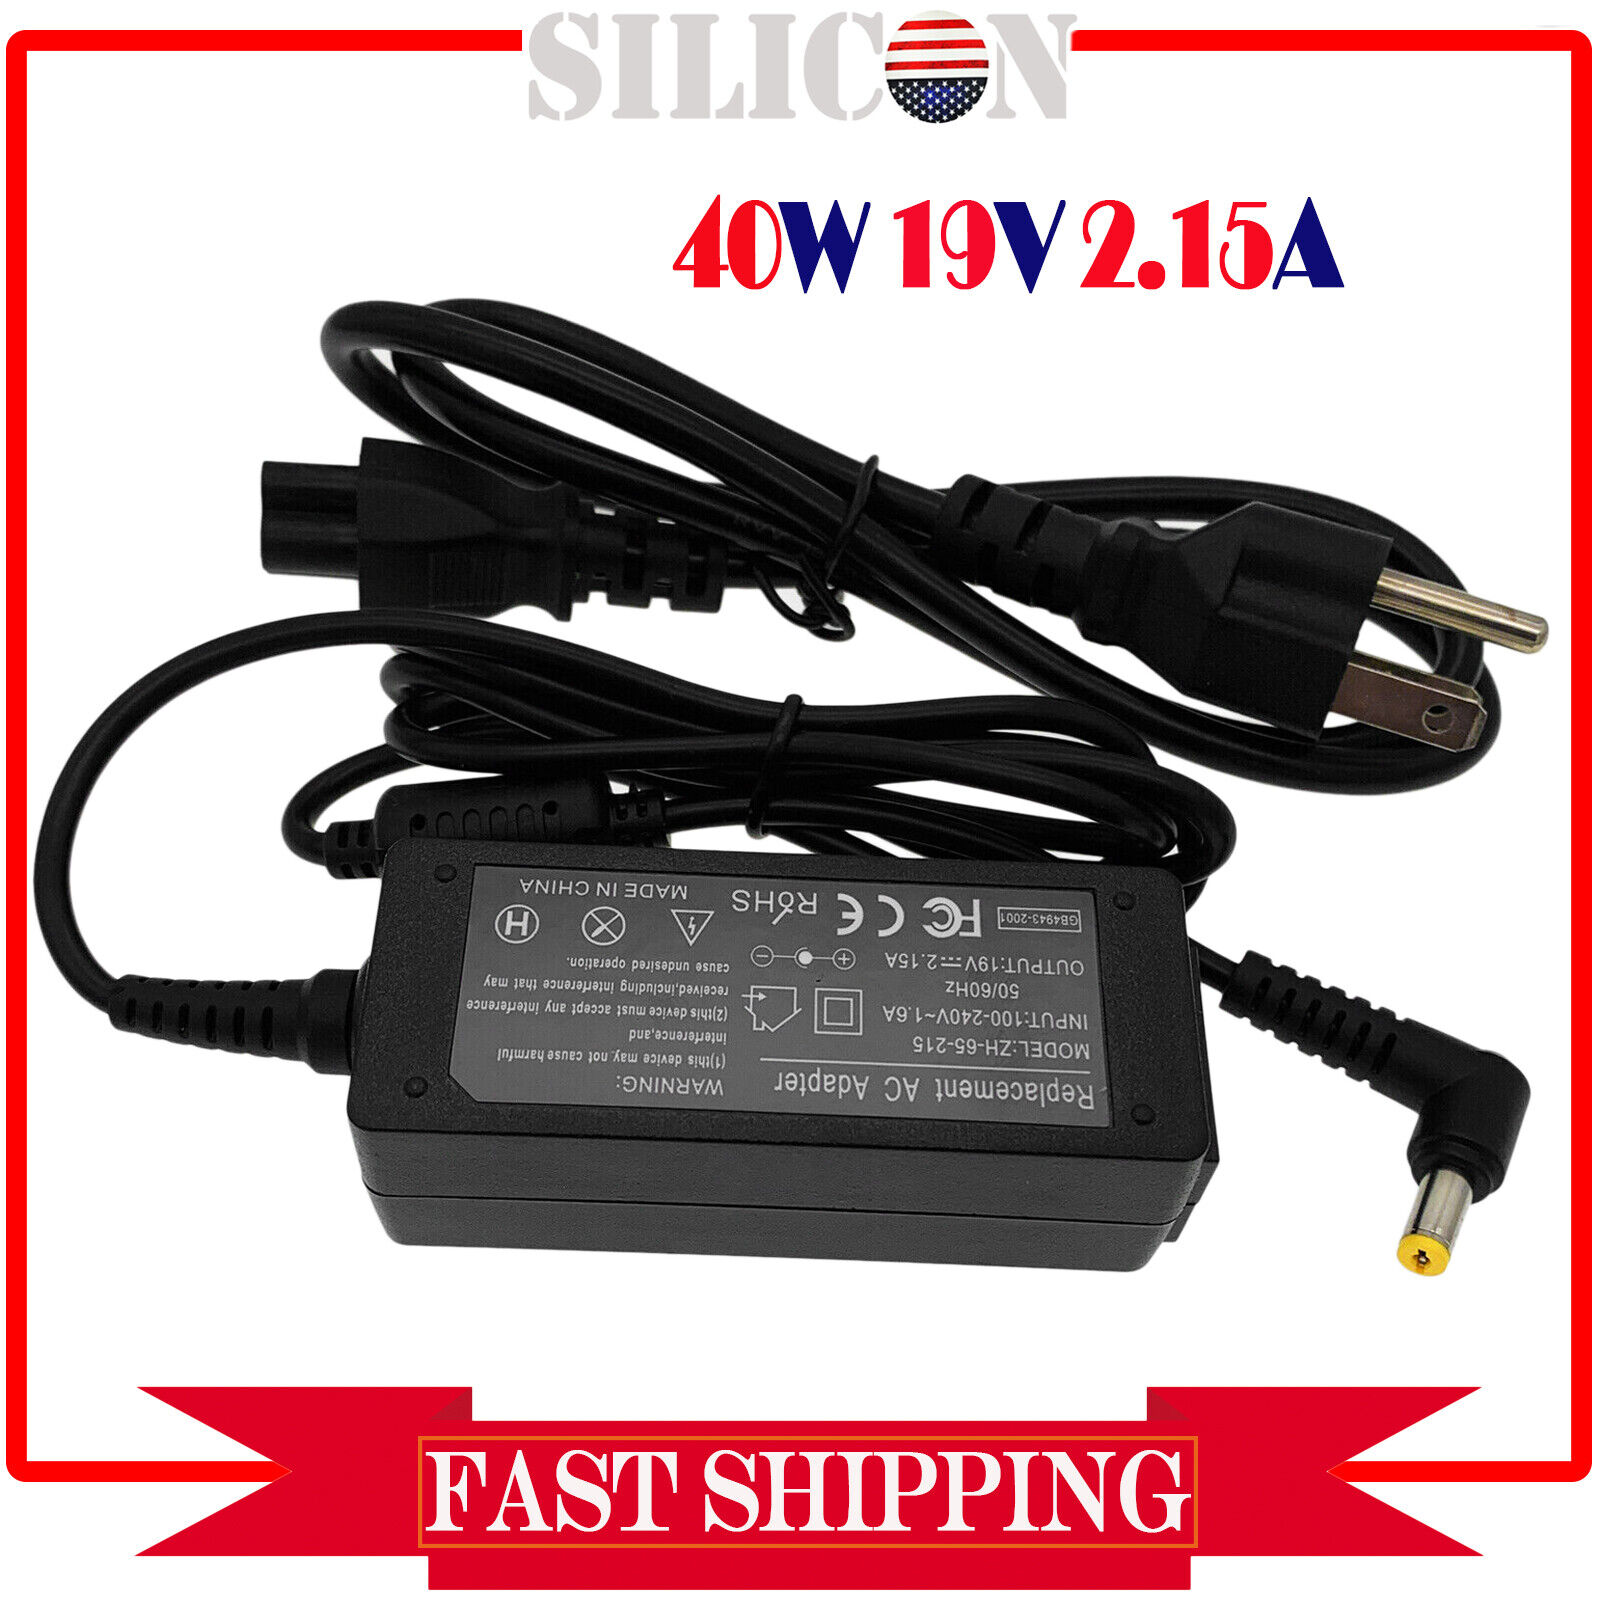 AC Adapter Power Supply Cord For Acer R221Q R240HY R251 R271 LED LCD Monitor